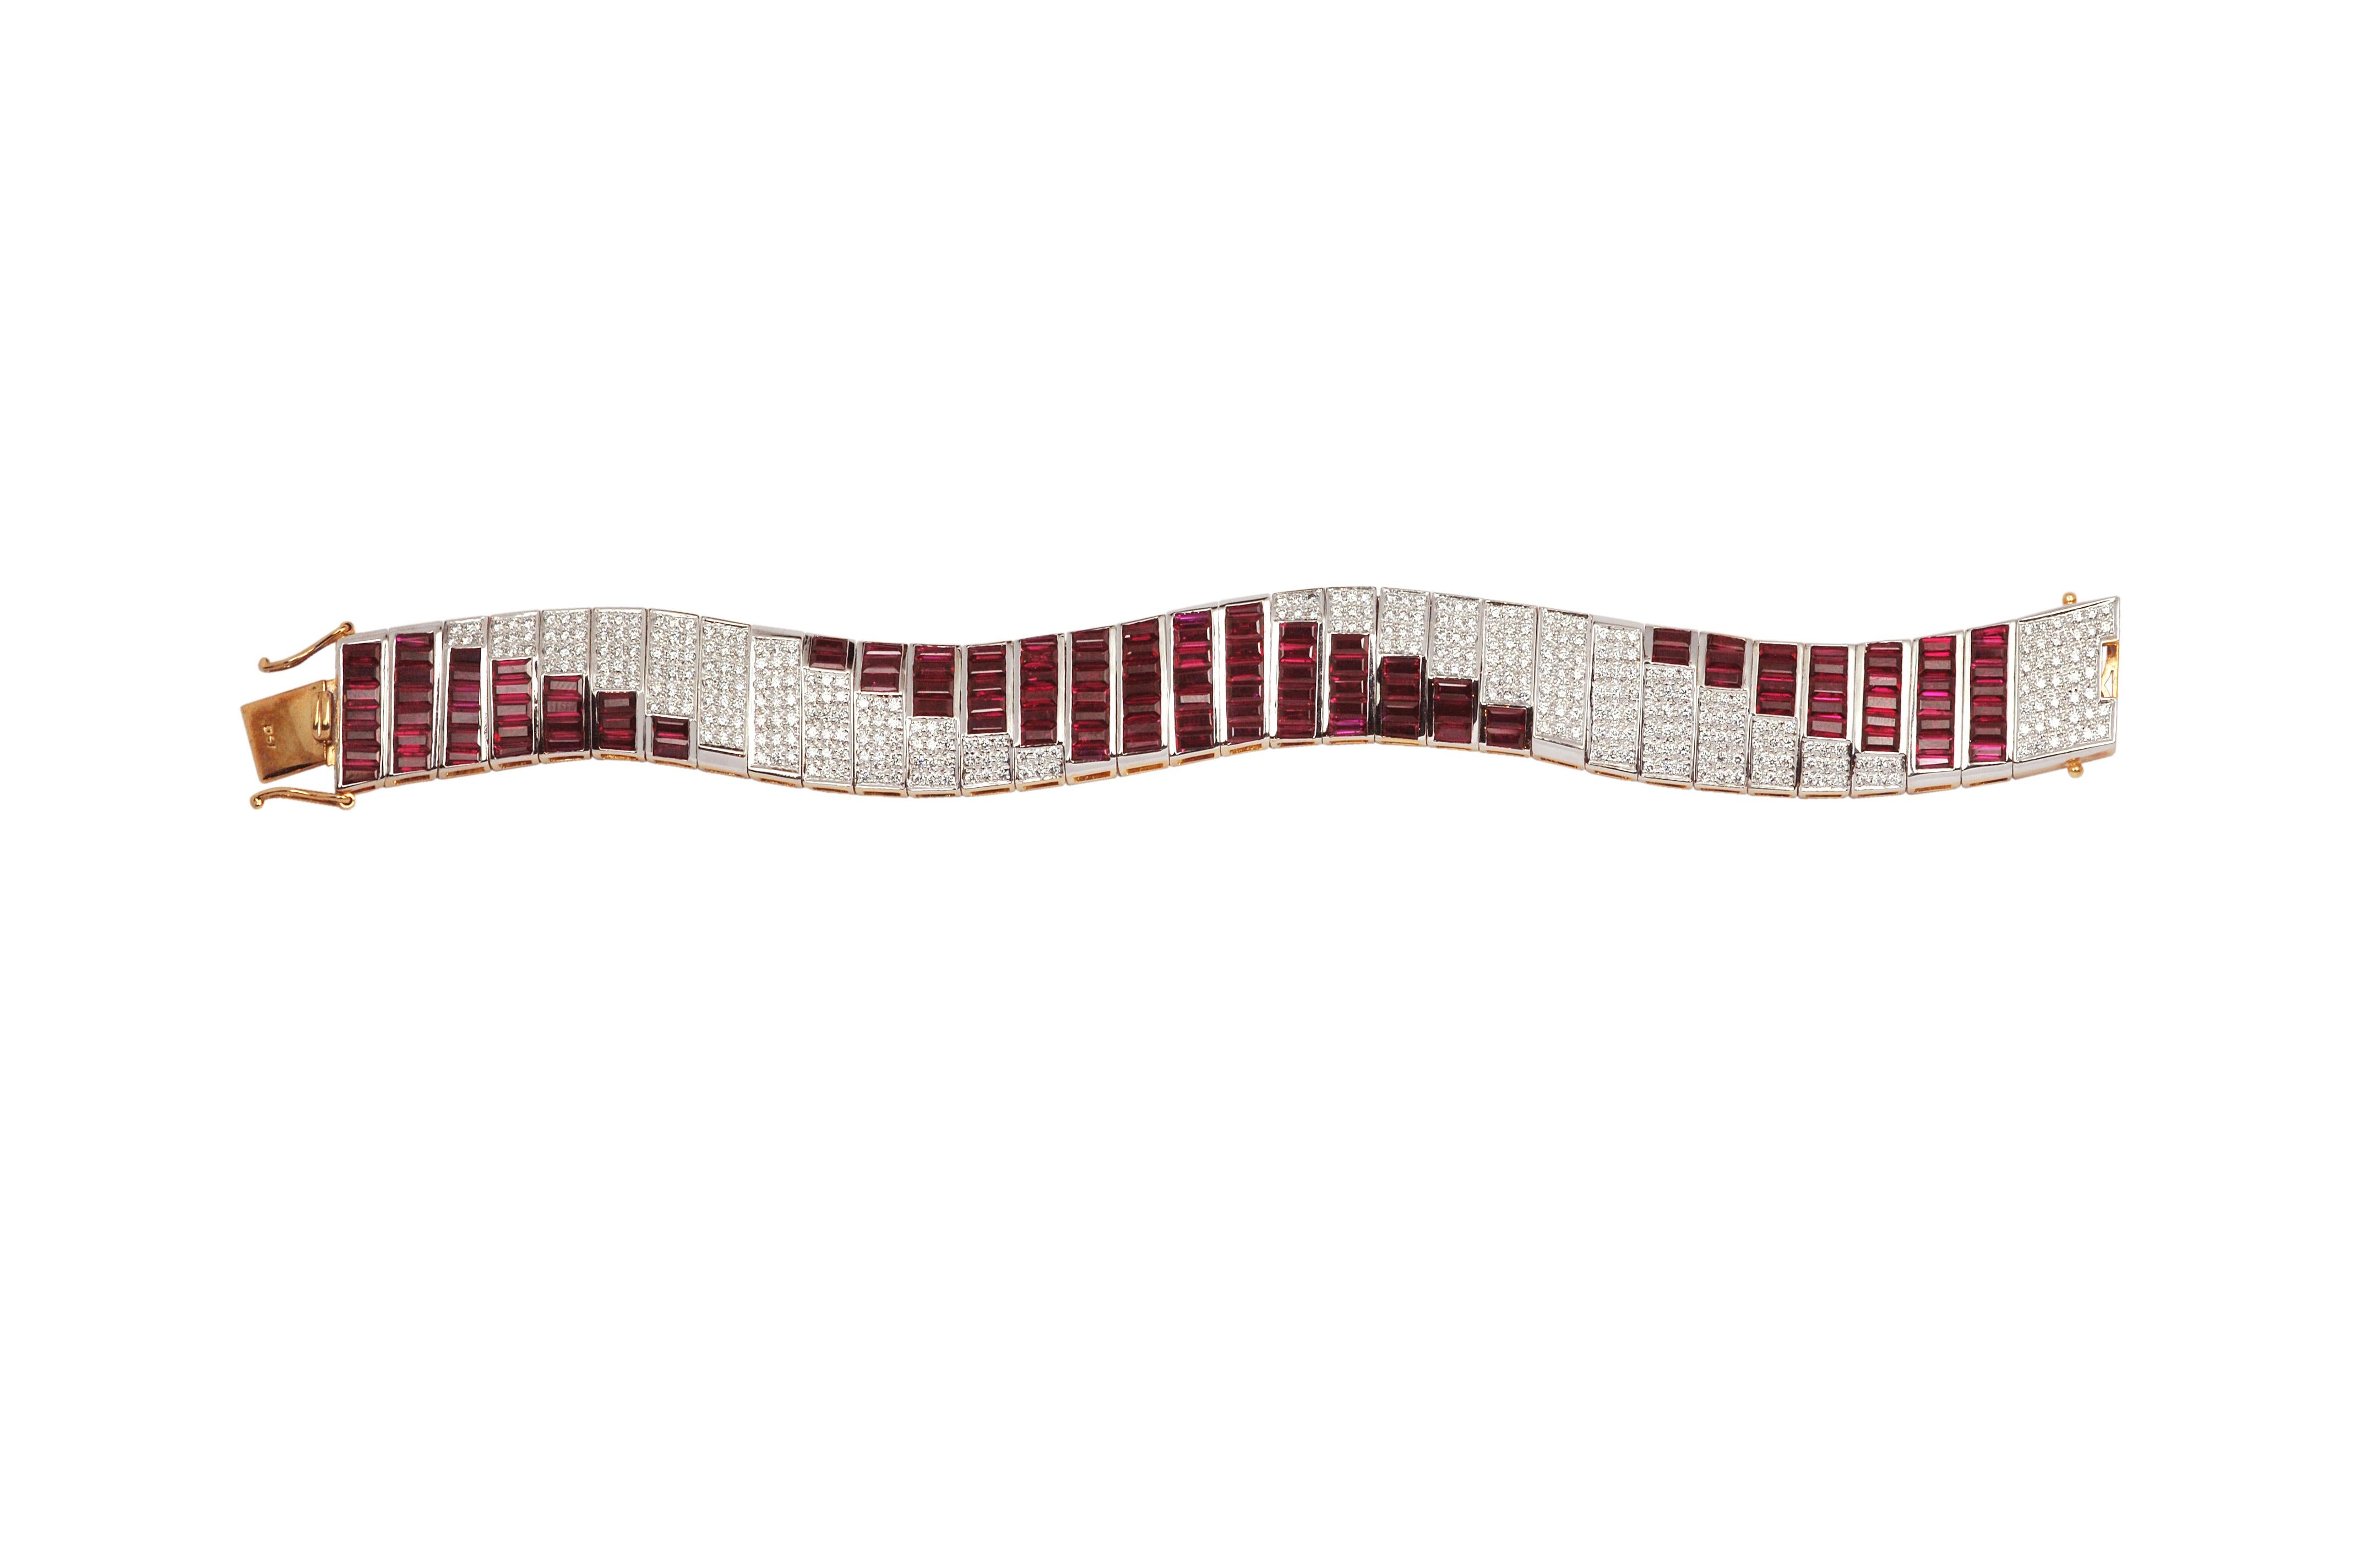 Ruby 3.36 carats with Diamond  18.83 carats Bracelet set in 18 Karat Gold Settings

Width: 1.5 cm
Length: 18.5 cm 
This Art Deco inspired Ruby and Diamond bracelet is simple yet elegant. A clean slat of baguette ruby and round diamonds completes the